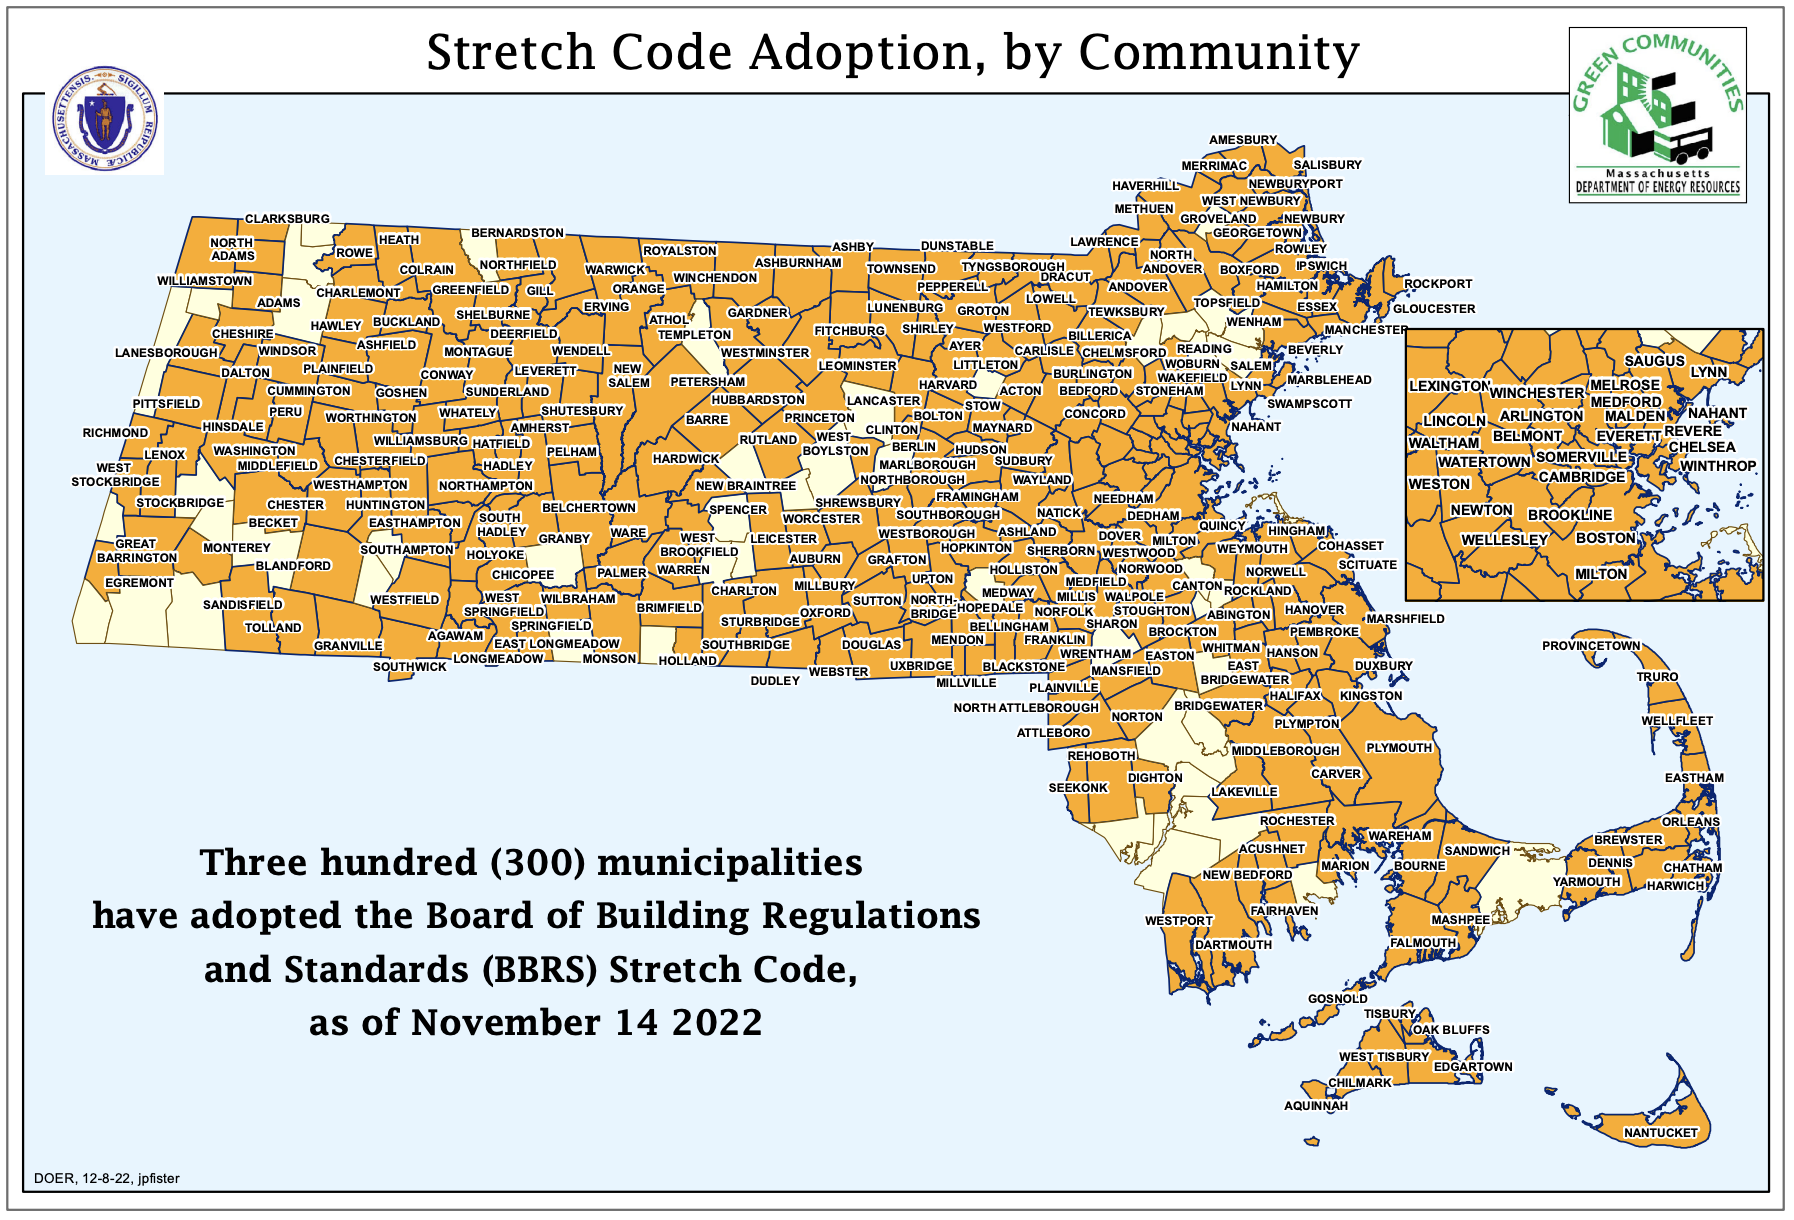 massachusetts was the first state to adopt the stretch code